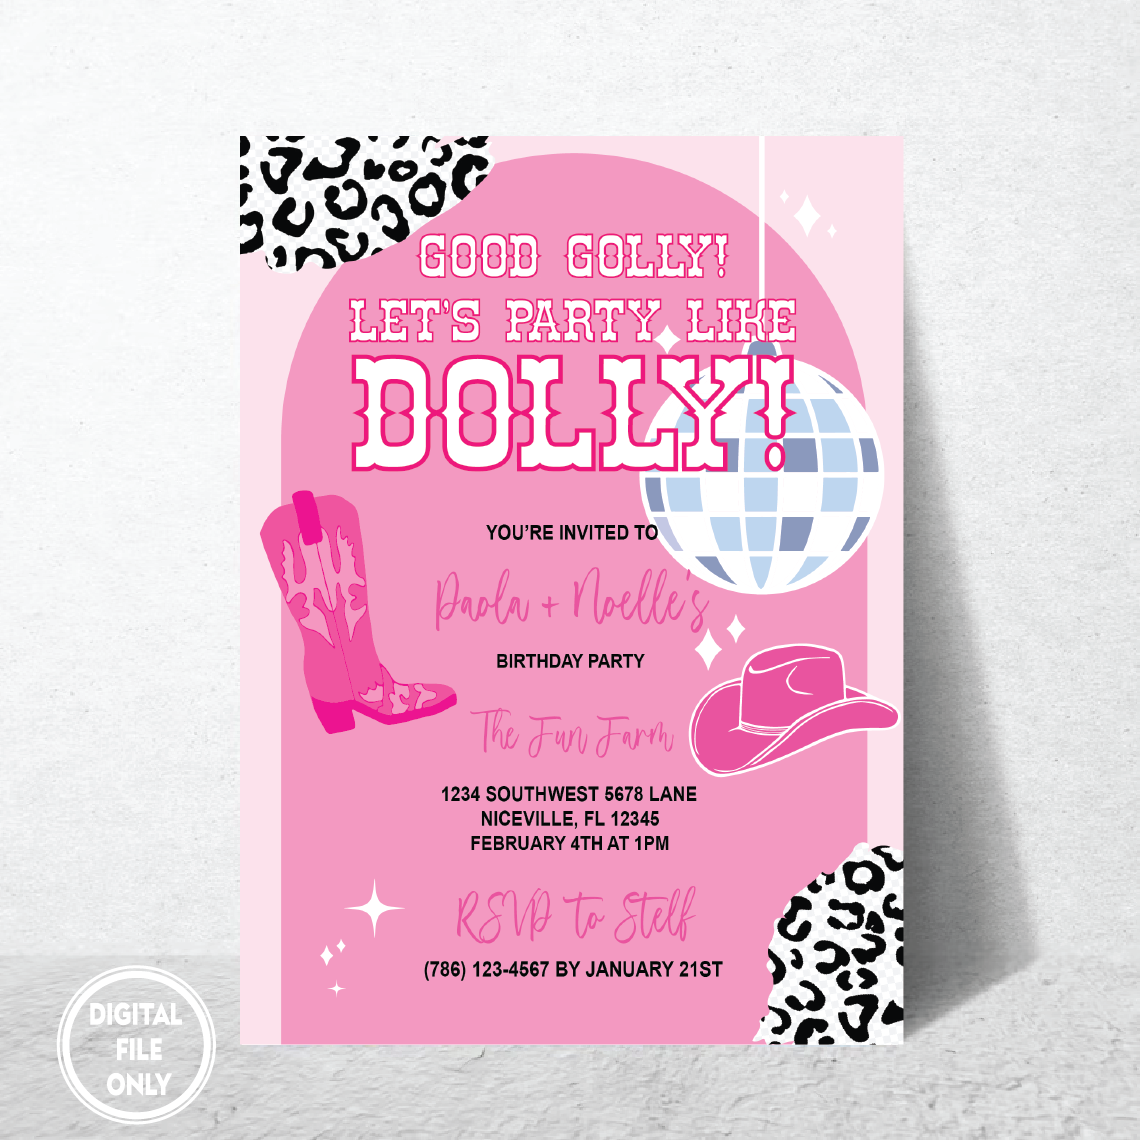 Personalized File Disco Dolly Birthday Invitation Cosmic Cowgirl Invitation Disco Cowgirl Invitation Let's Go Girls Rhinestone Cowgirl Nashville Birthday PNG File Only